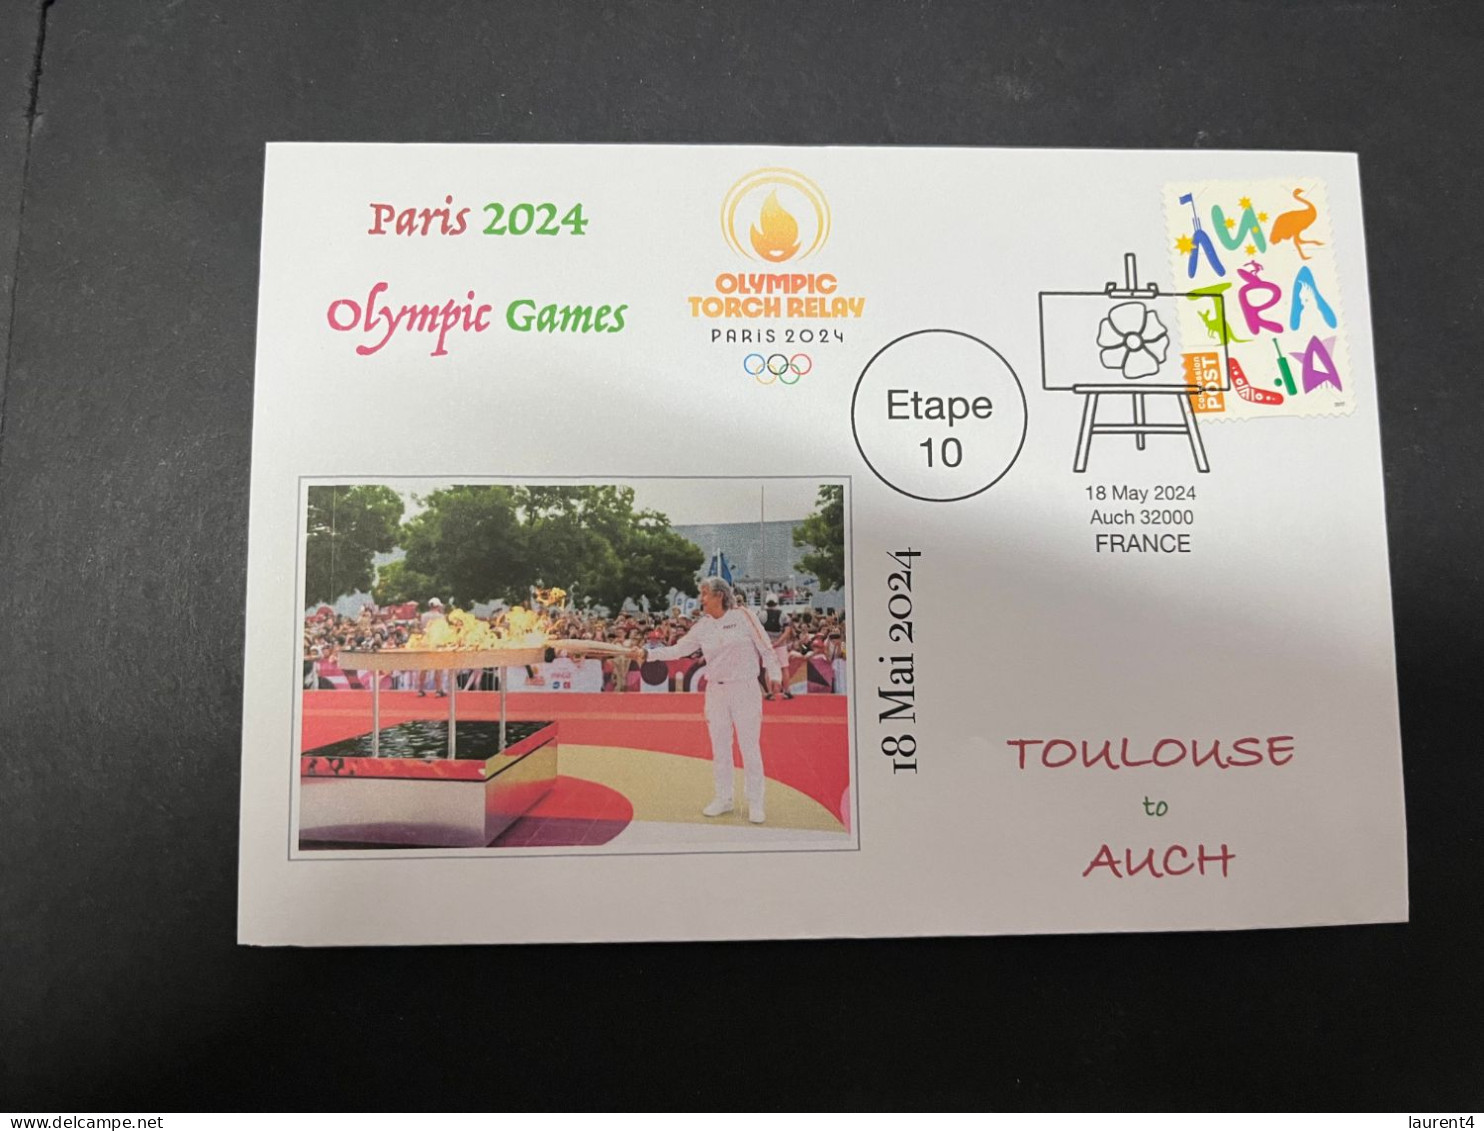 19-5-2024 (5 Z 27) Paris Olympic Games 2024 - Torch Relay (Etape 10) In Auch (18-5-2024) With OZ Stamp - Verano 2024 : París